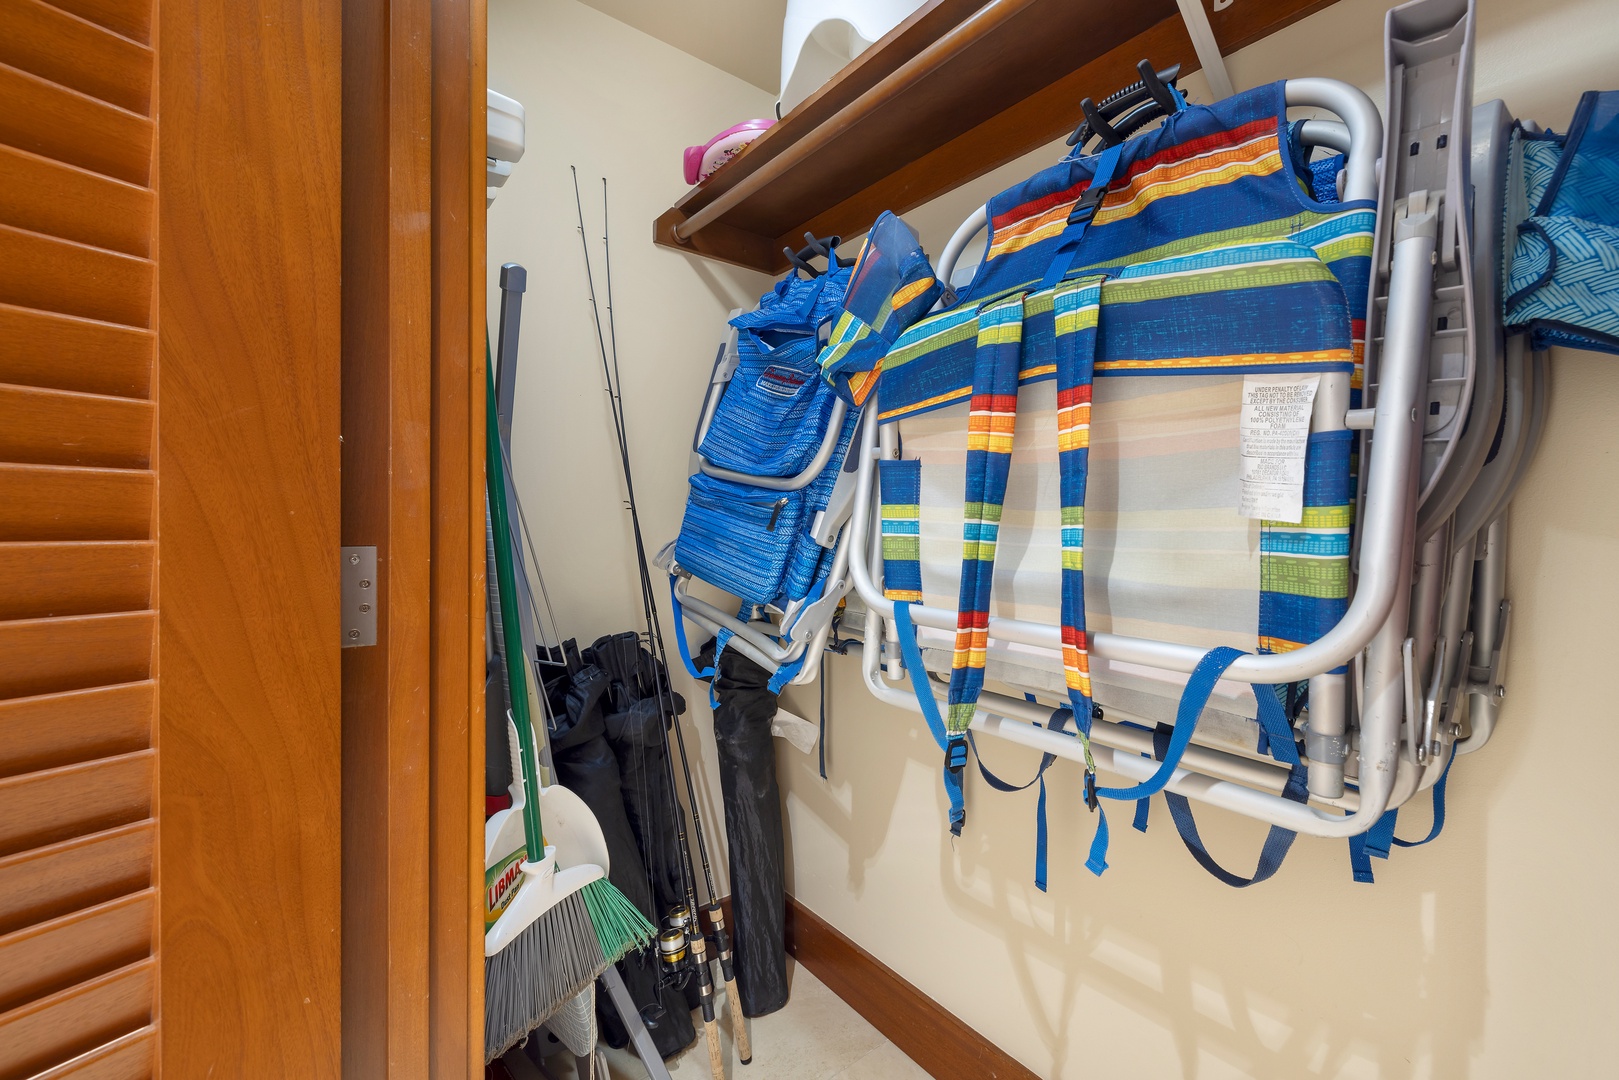 Kapolei Vacation Rentals, Ko Olina Beach Villas B107 - A neatly organized storage closet with beach chairs and fishing rods, ready for outdoor activities.